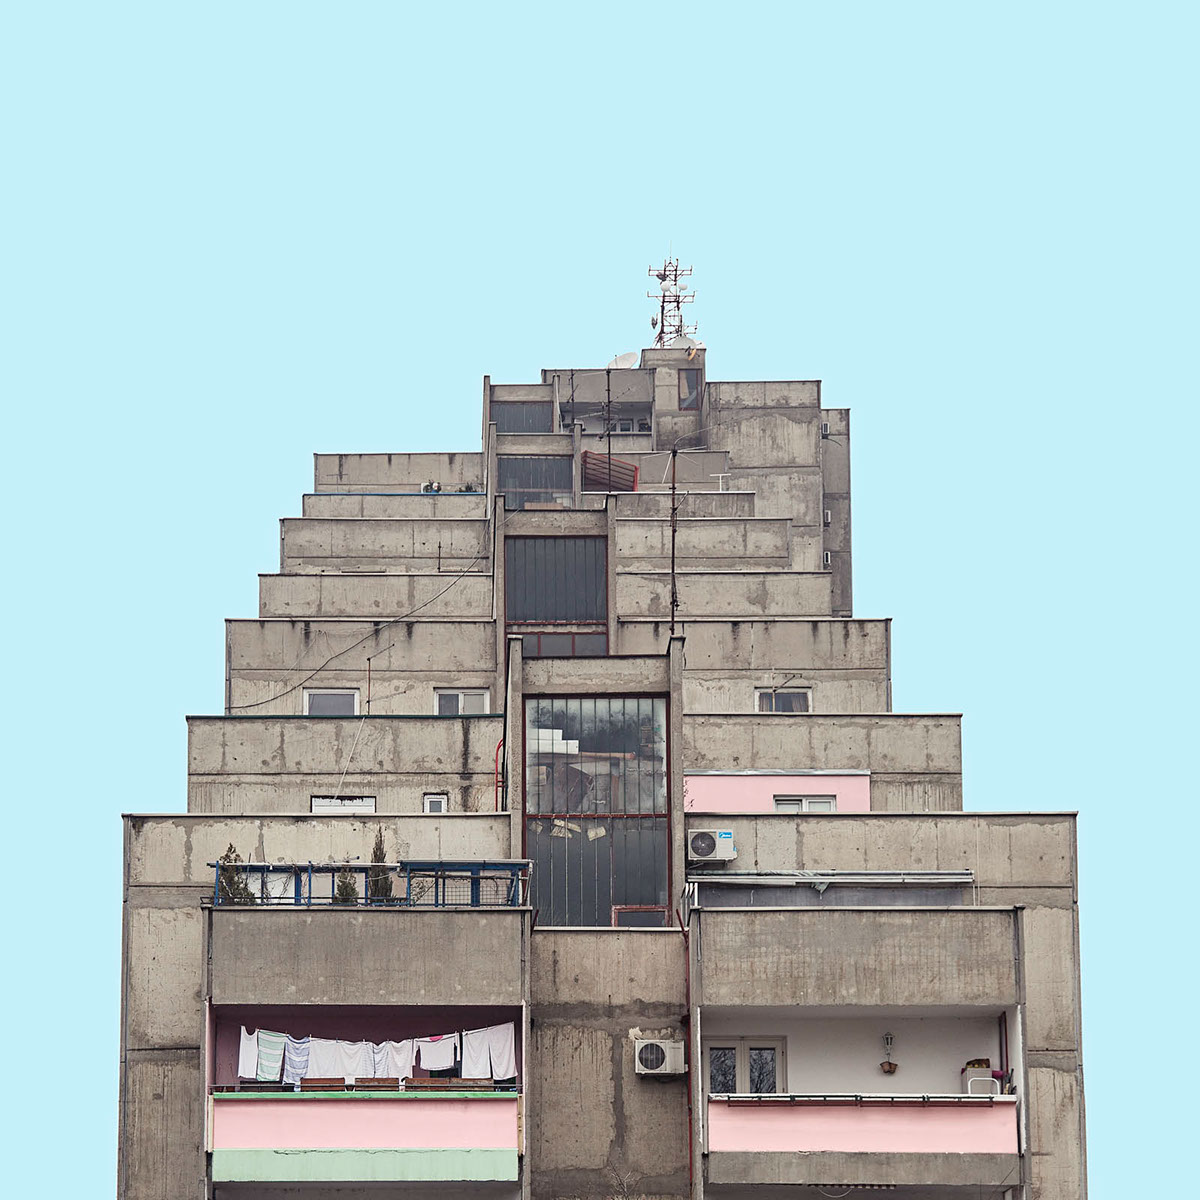 These Photos Of Belgrade’s Socialist Architecture Look Like Ancient Spaceships